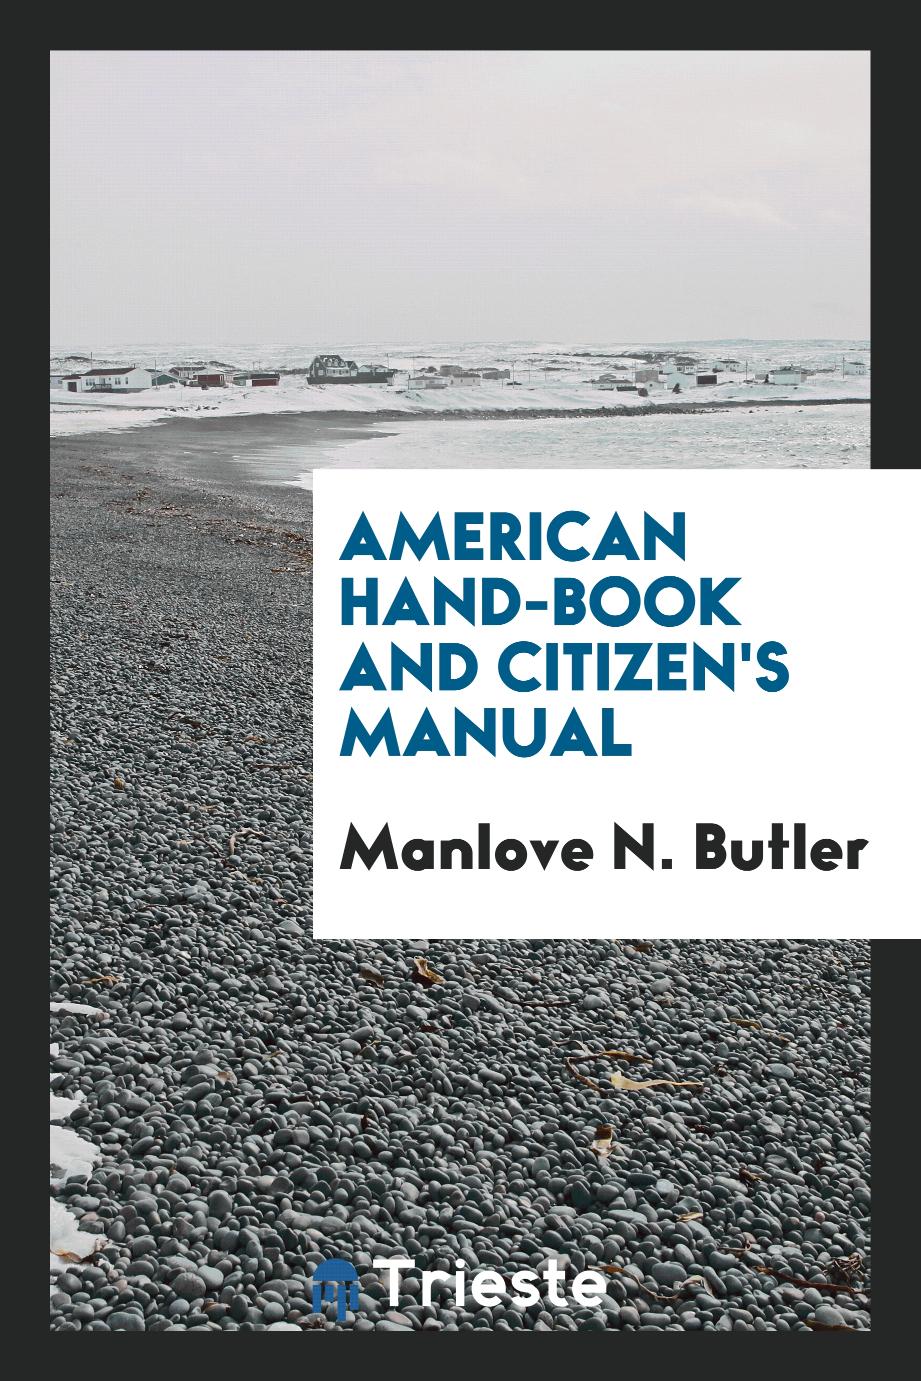 American hand-book and citizen's manual